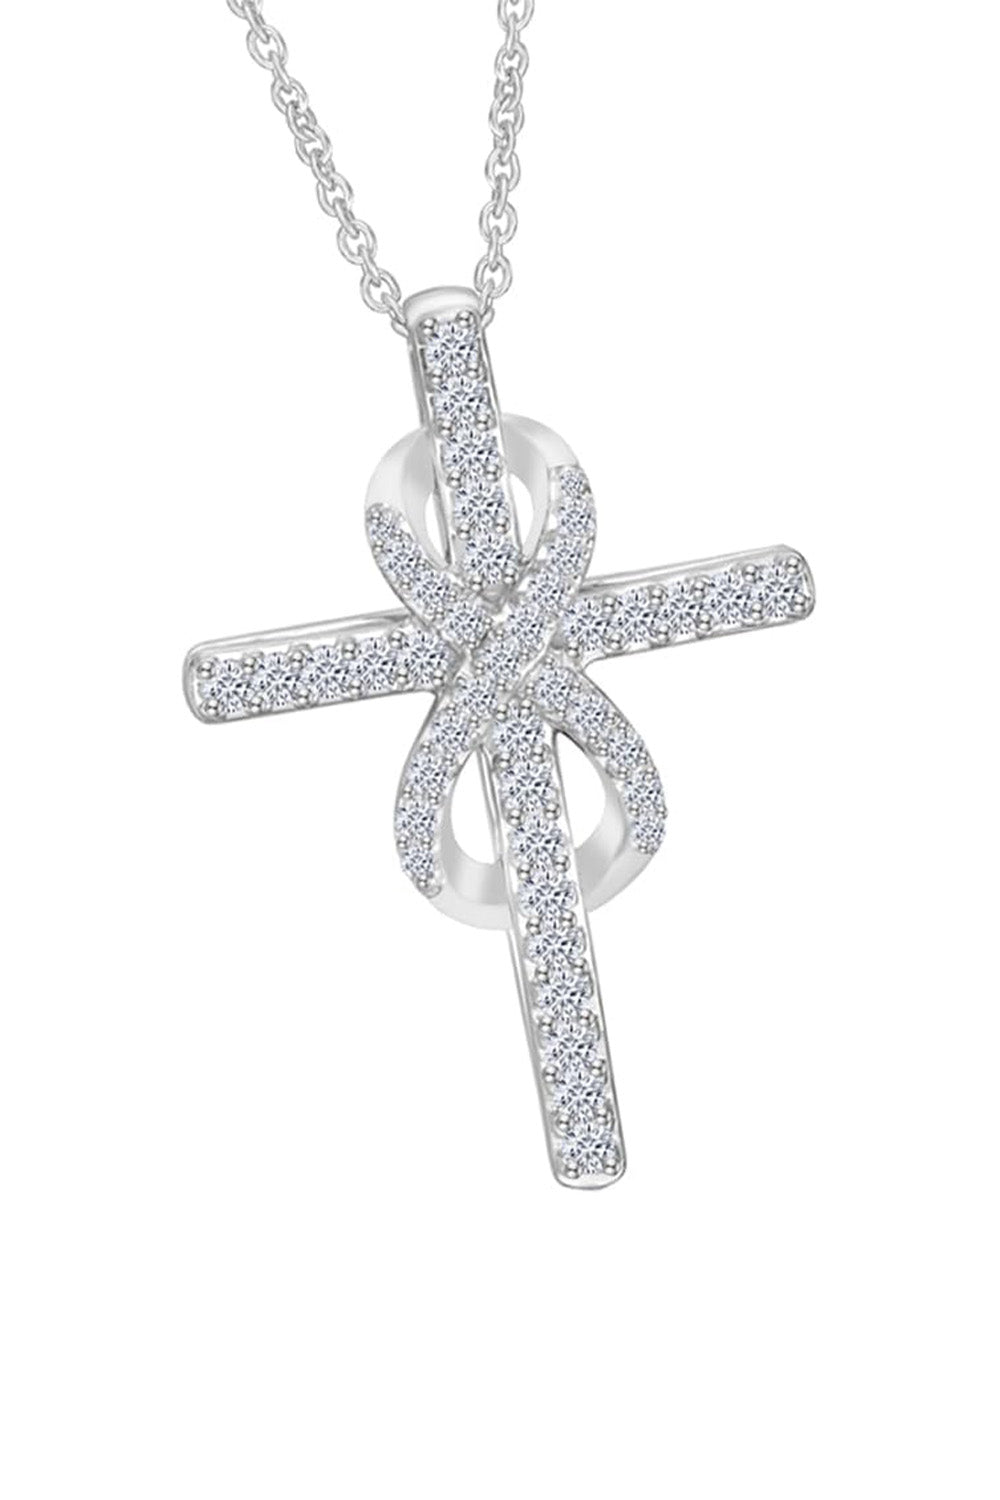 White Gold Color Diamond Cross with Infinity Pendant Necklace 